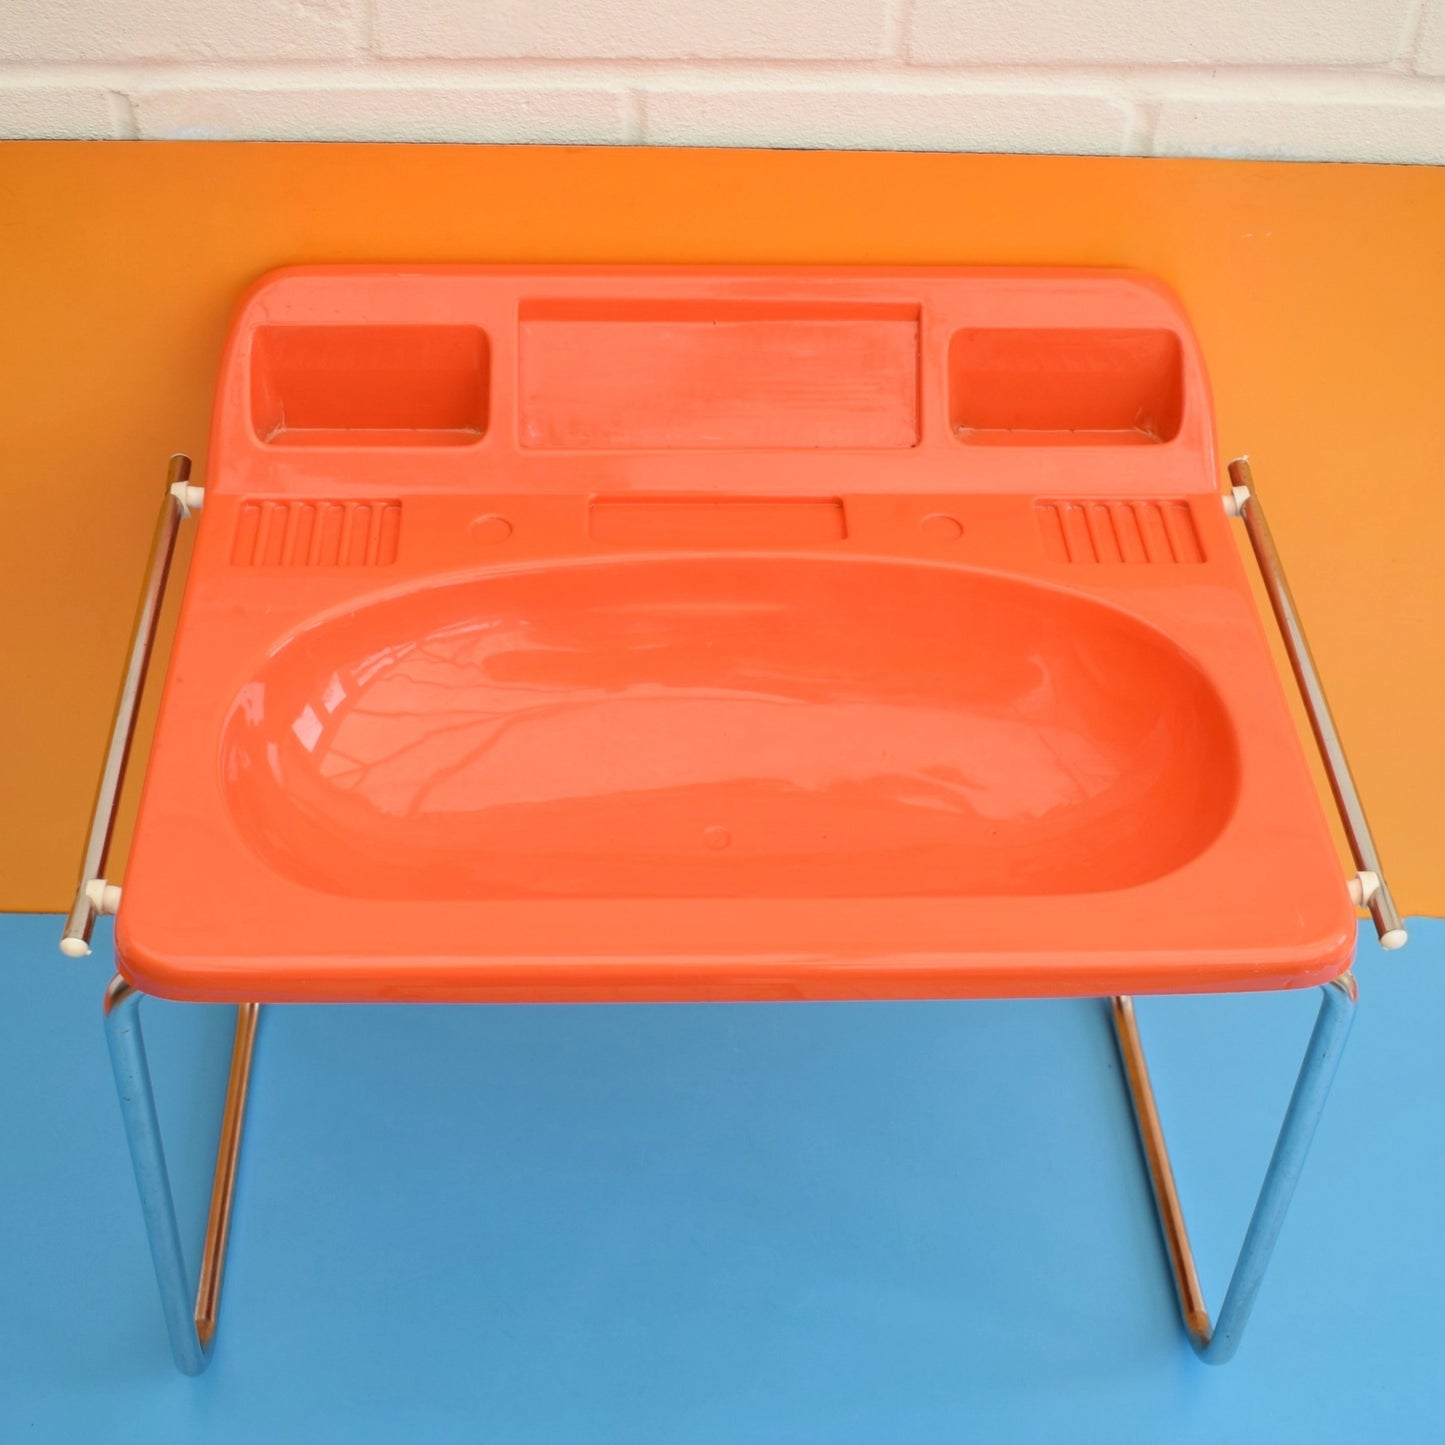 Vintage 1970s Plastic Childs/ Play Stand / Craft table? - Orange